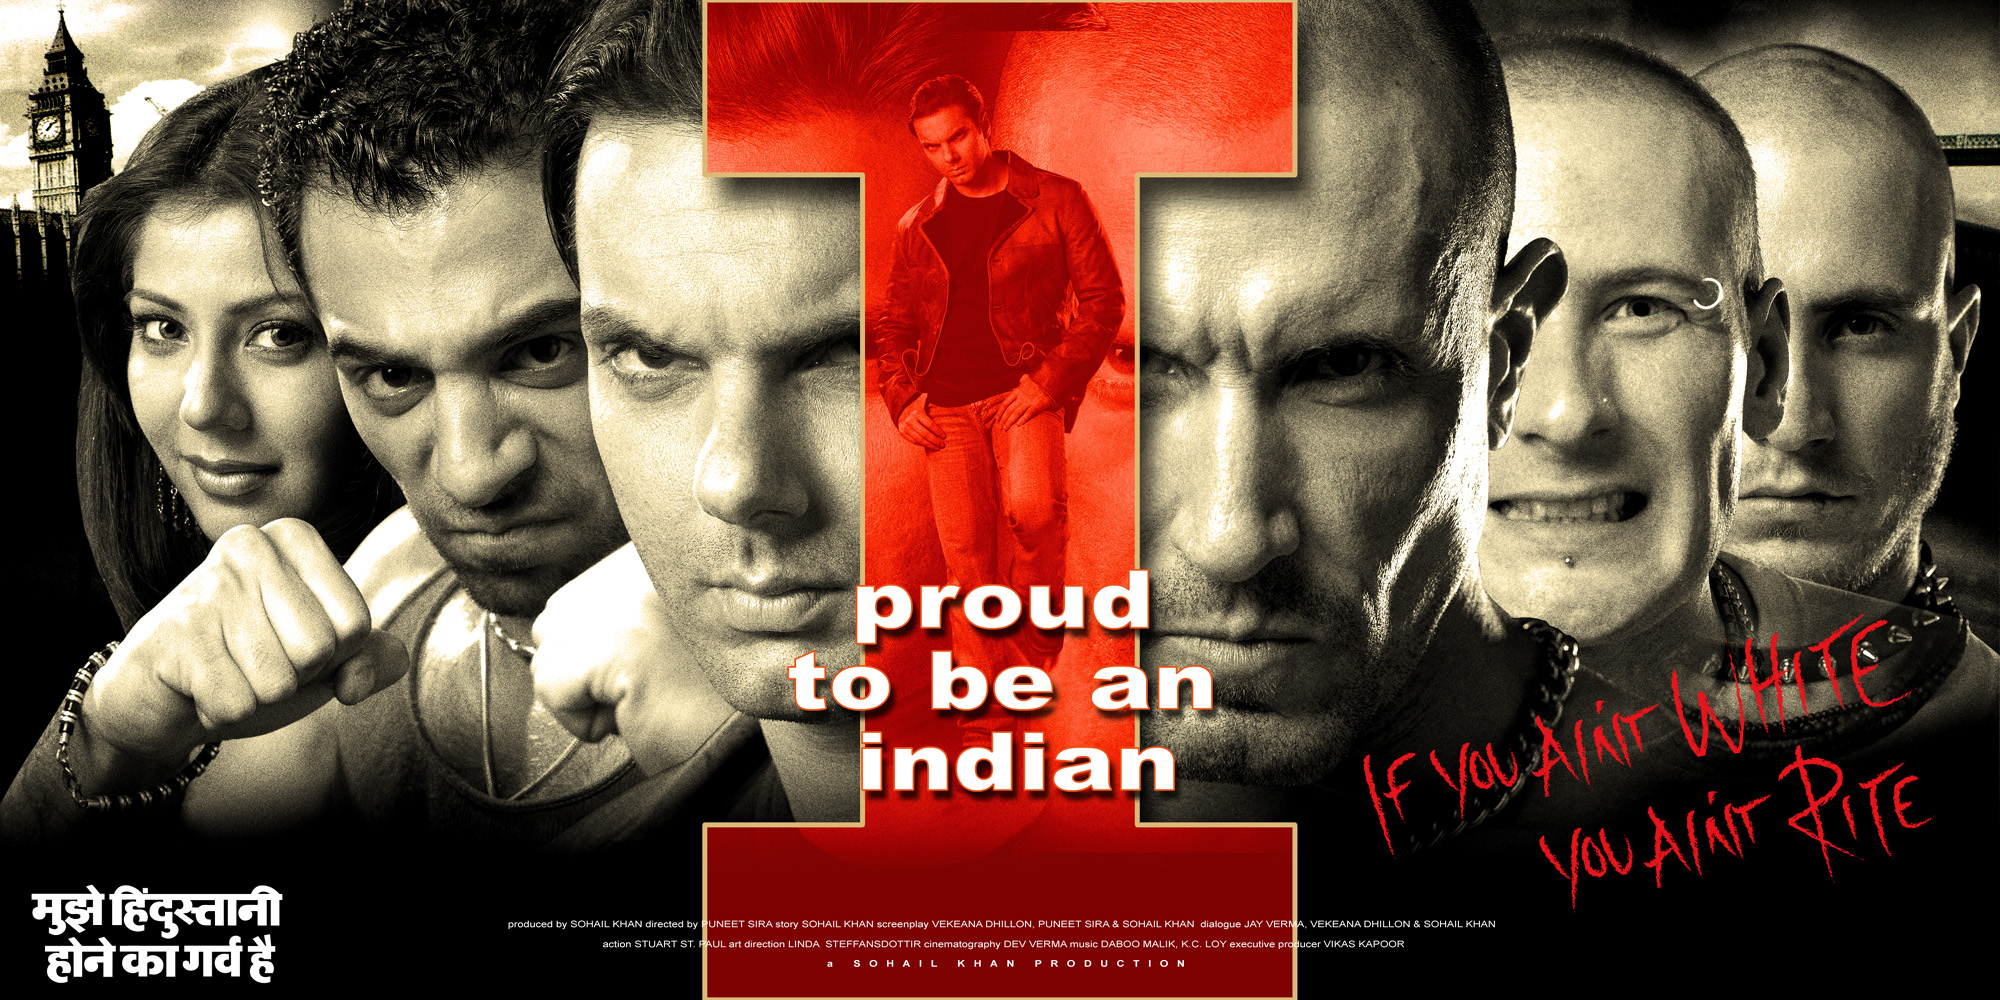 I-PROUD TO BE AN INDIAN, Screenplay by Vekeana Dhillon and Puneet Sira